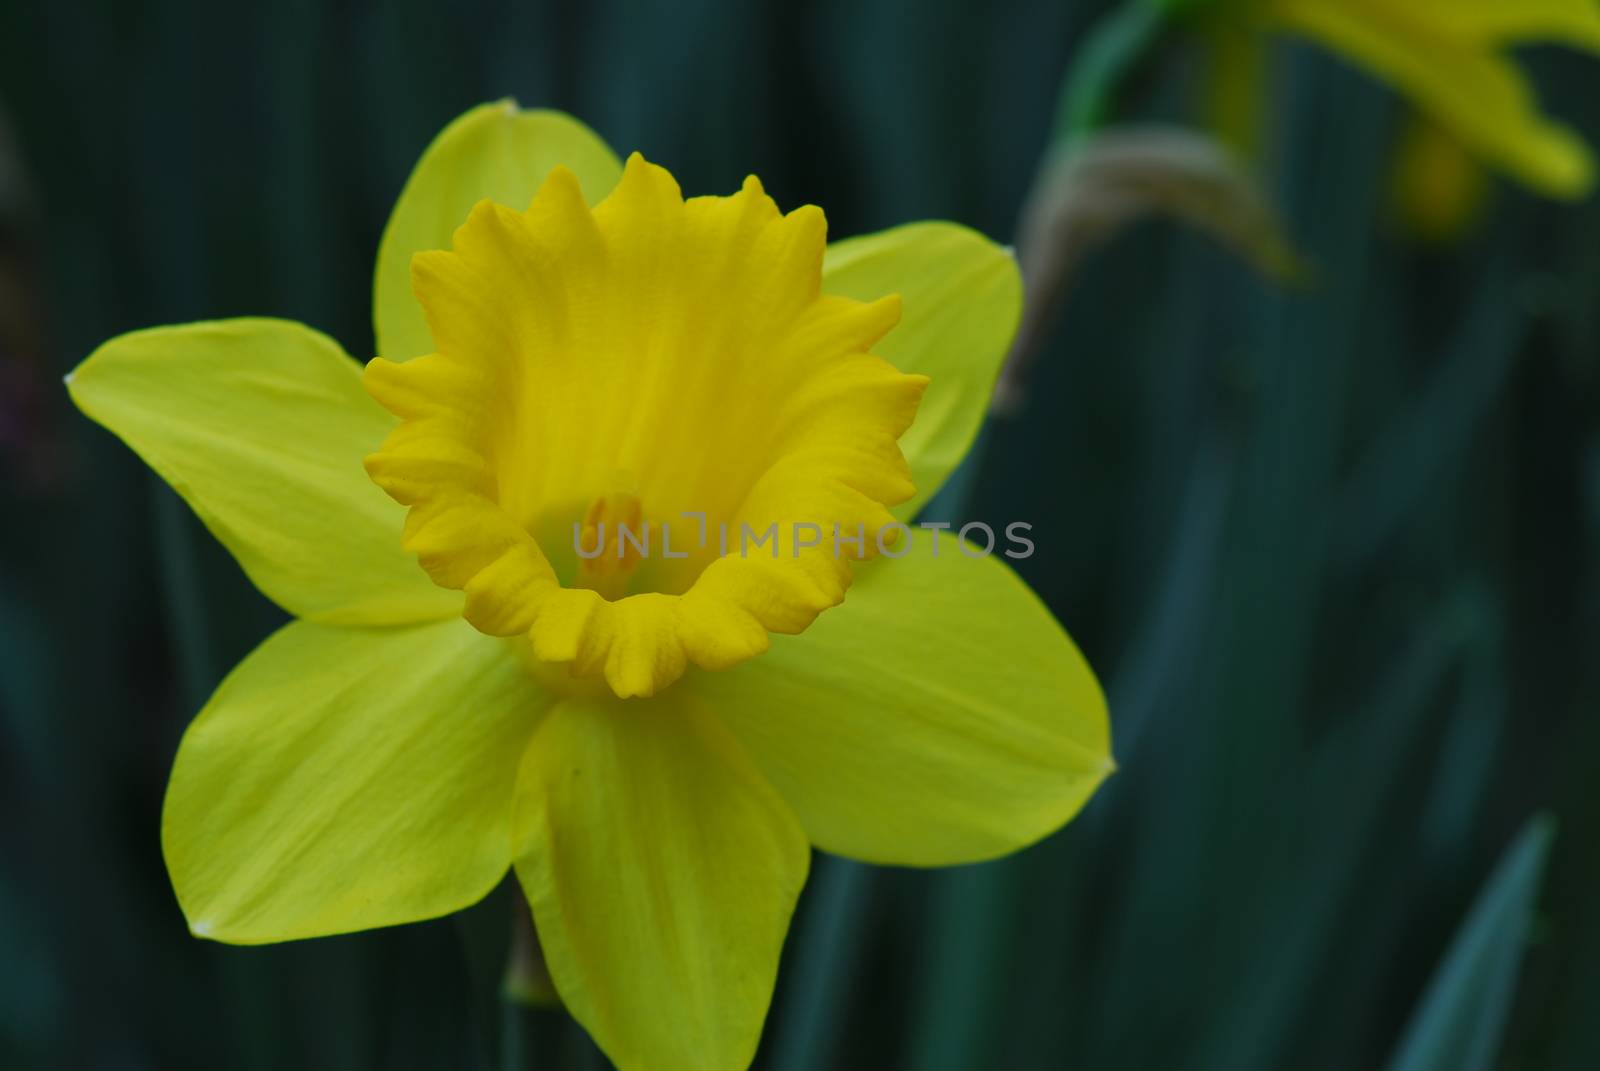 Daffodil Narcissus yellow flower by nikonite